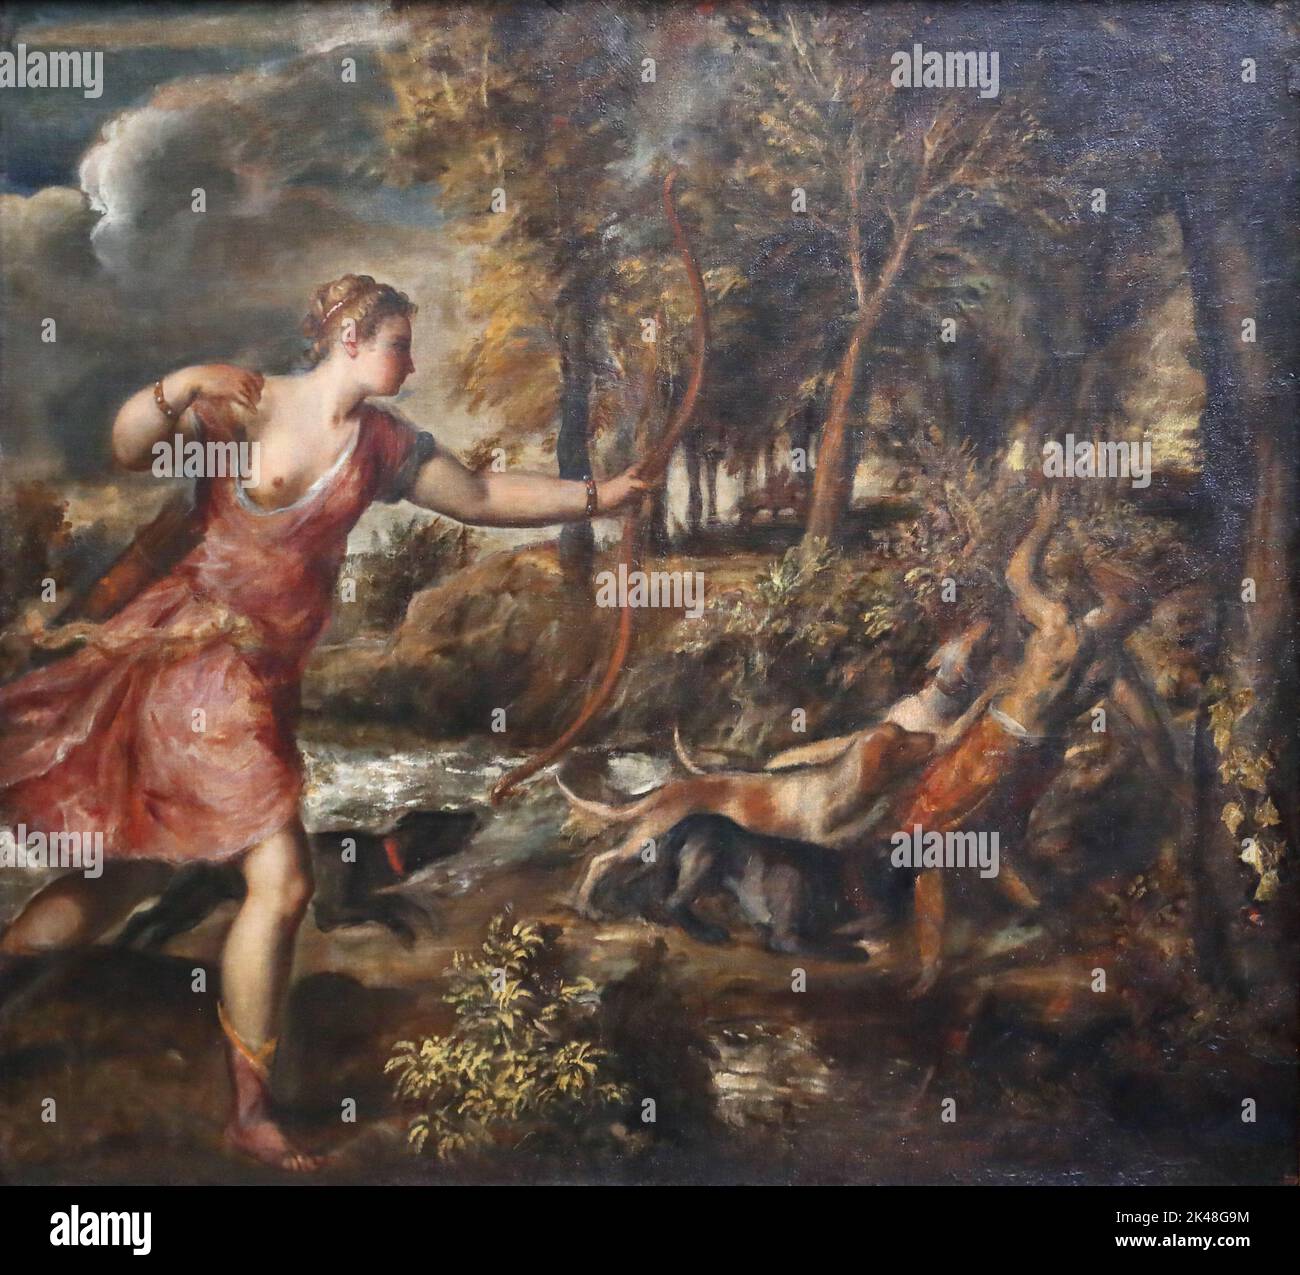 The Death of Actaeon by Italian Renaissance painter Titian at the National Gallery, London, UK Stock Photo